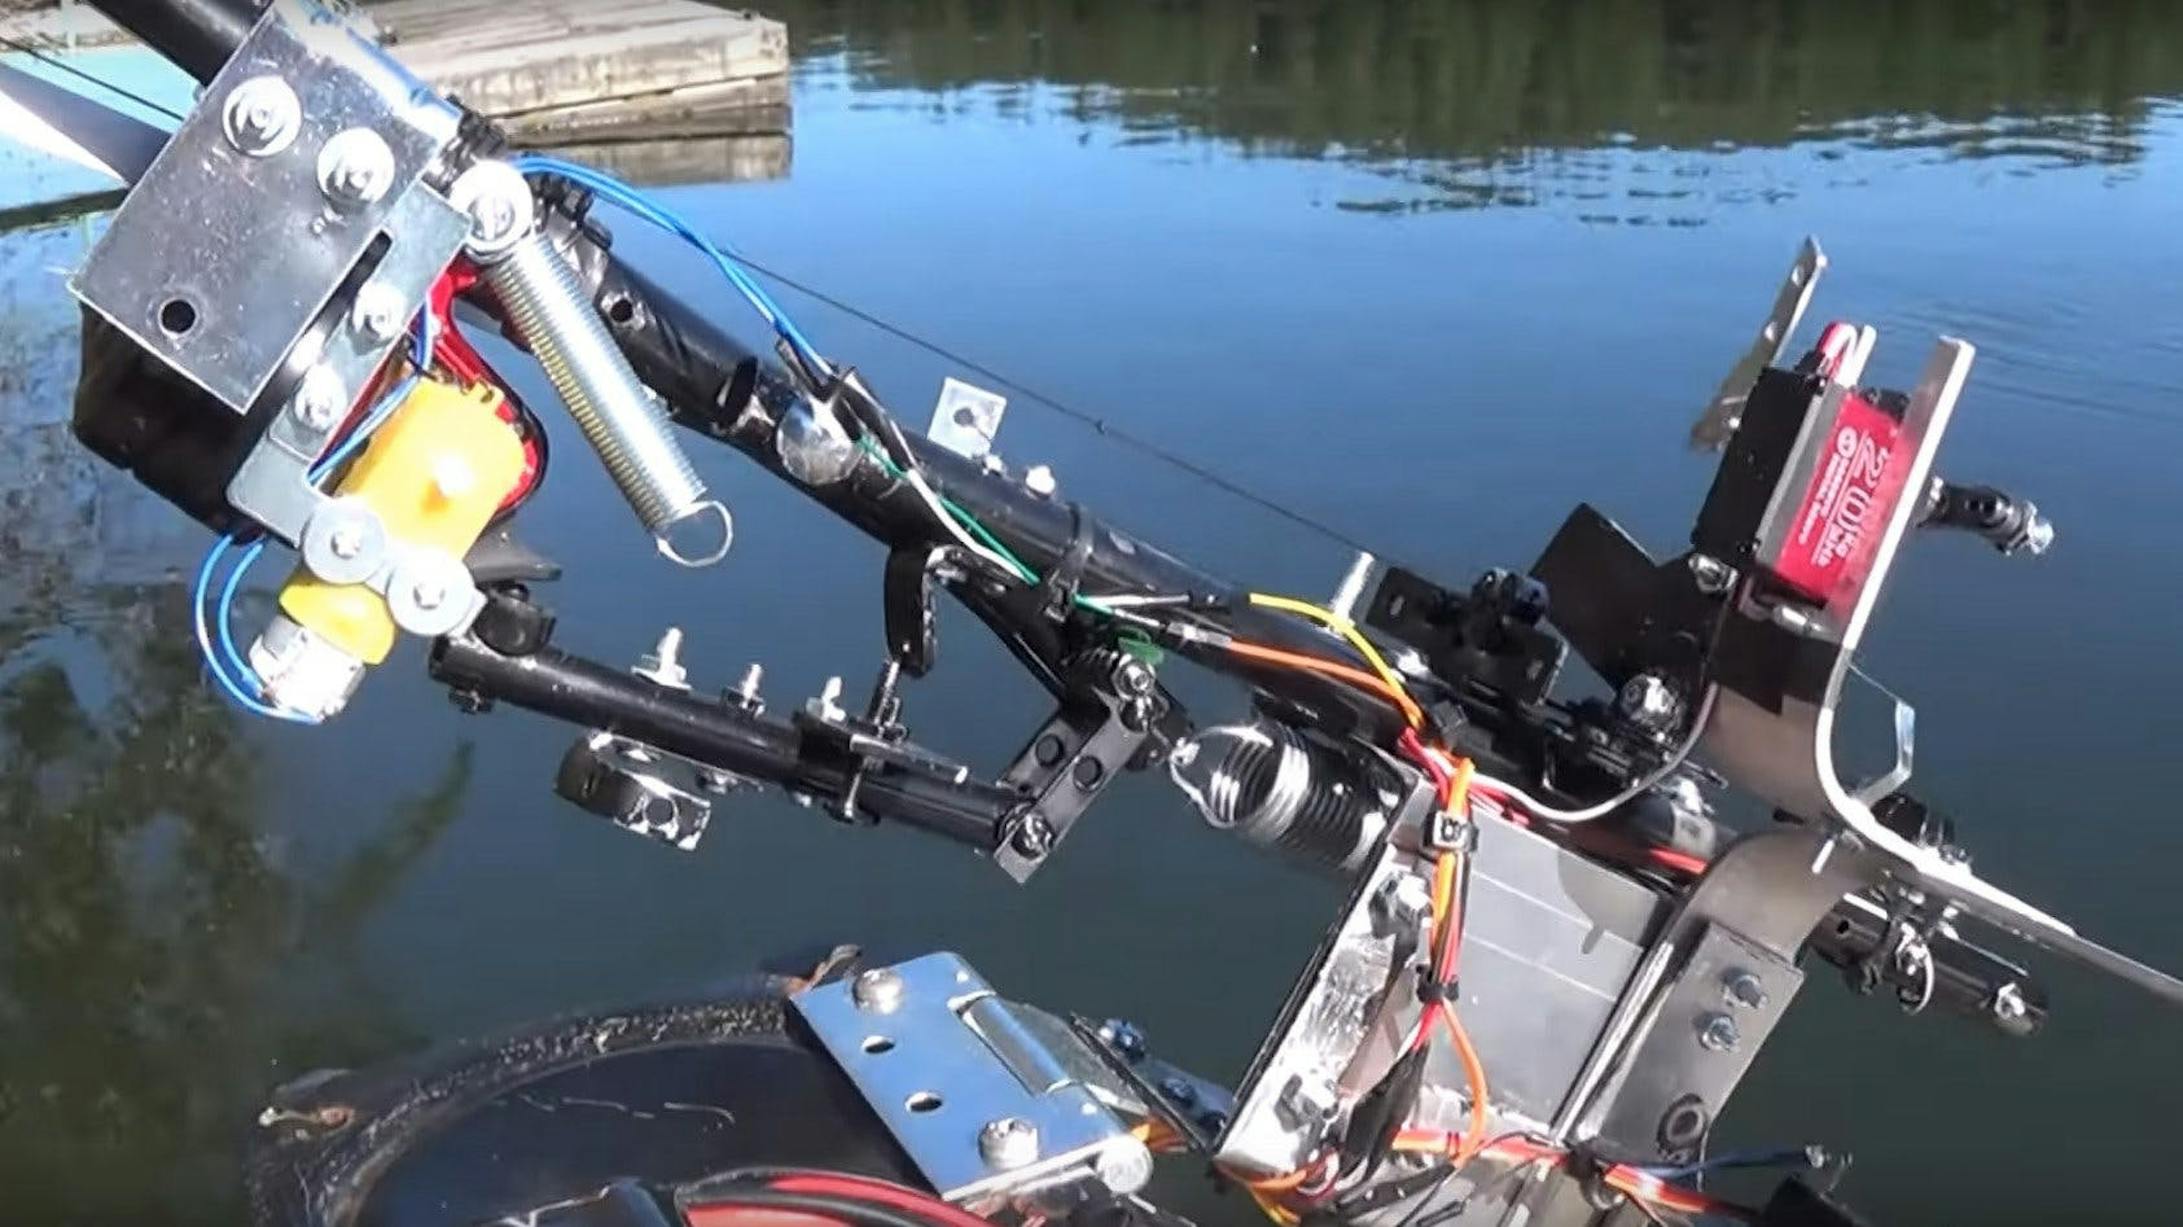 Robotic Fishing Pole Casts and Reels Automatically 